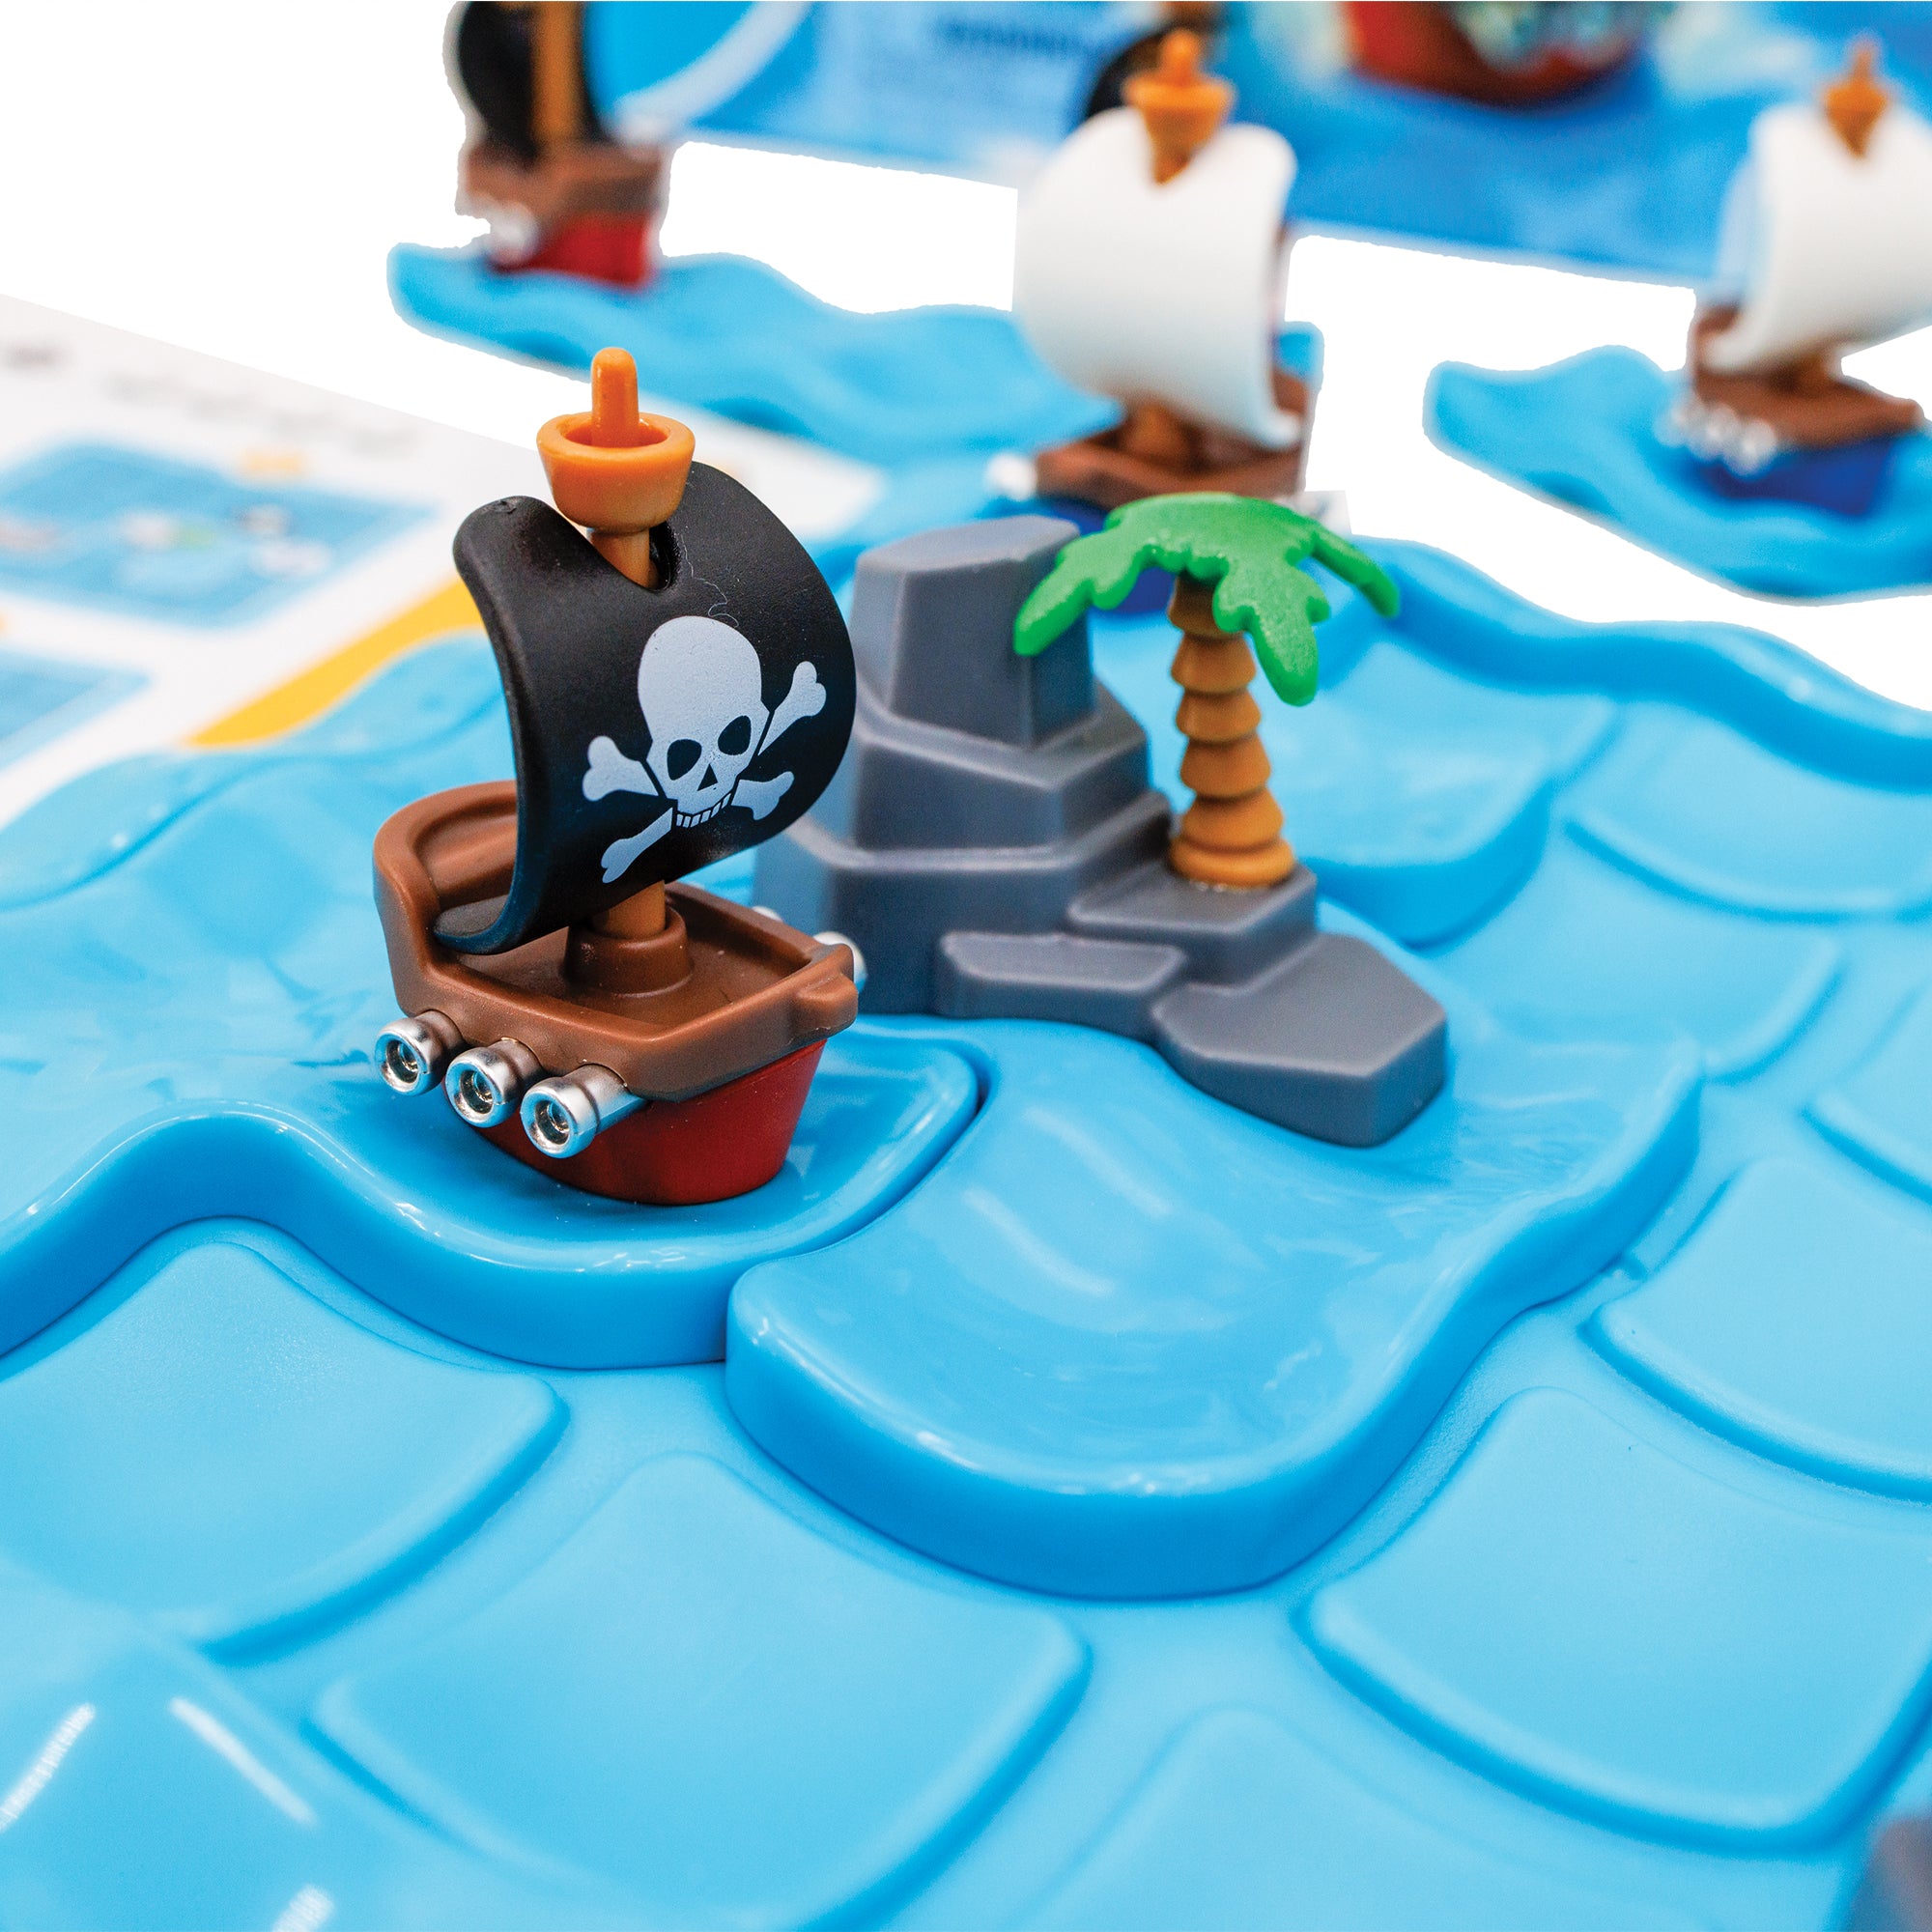 A close-up of the Pirates Crossfire game. The gameboard is blue and there are 2 pieces set in place on the board; one ship with a white skull on a black sail, and one rock piece with a palm tree. You can see pieces and the instruction book, out of focus, in the background.